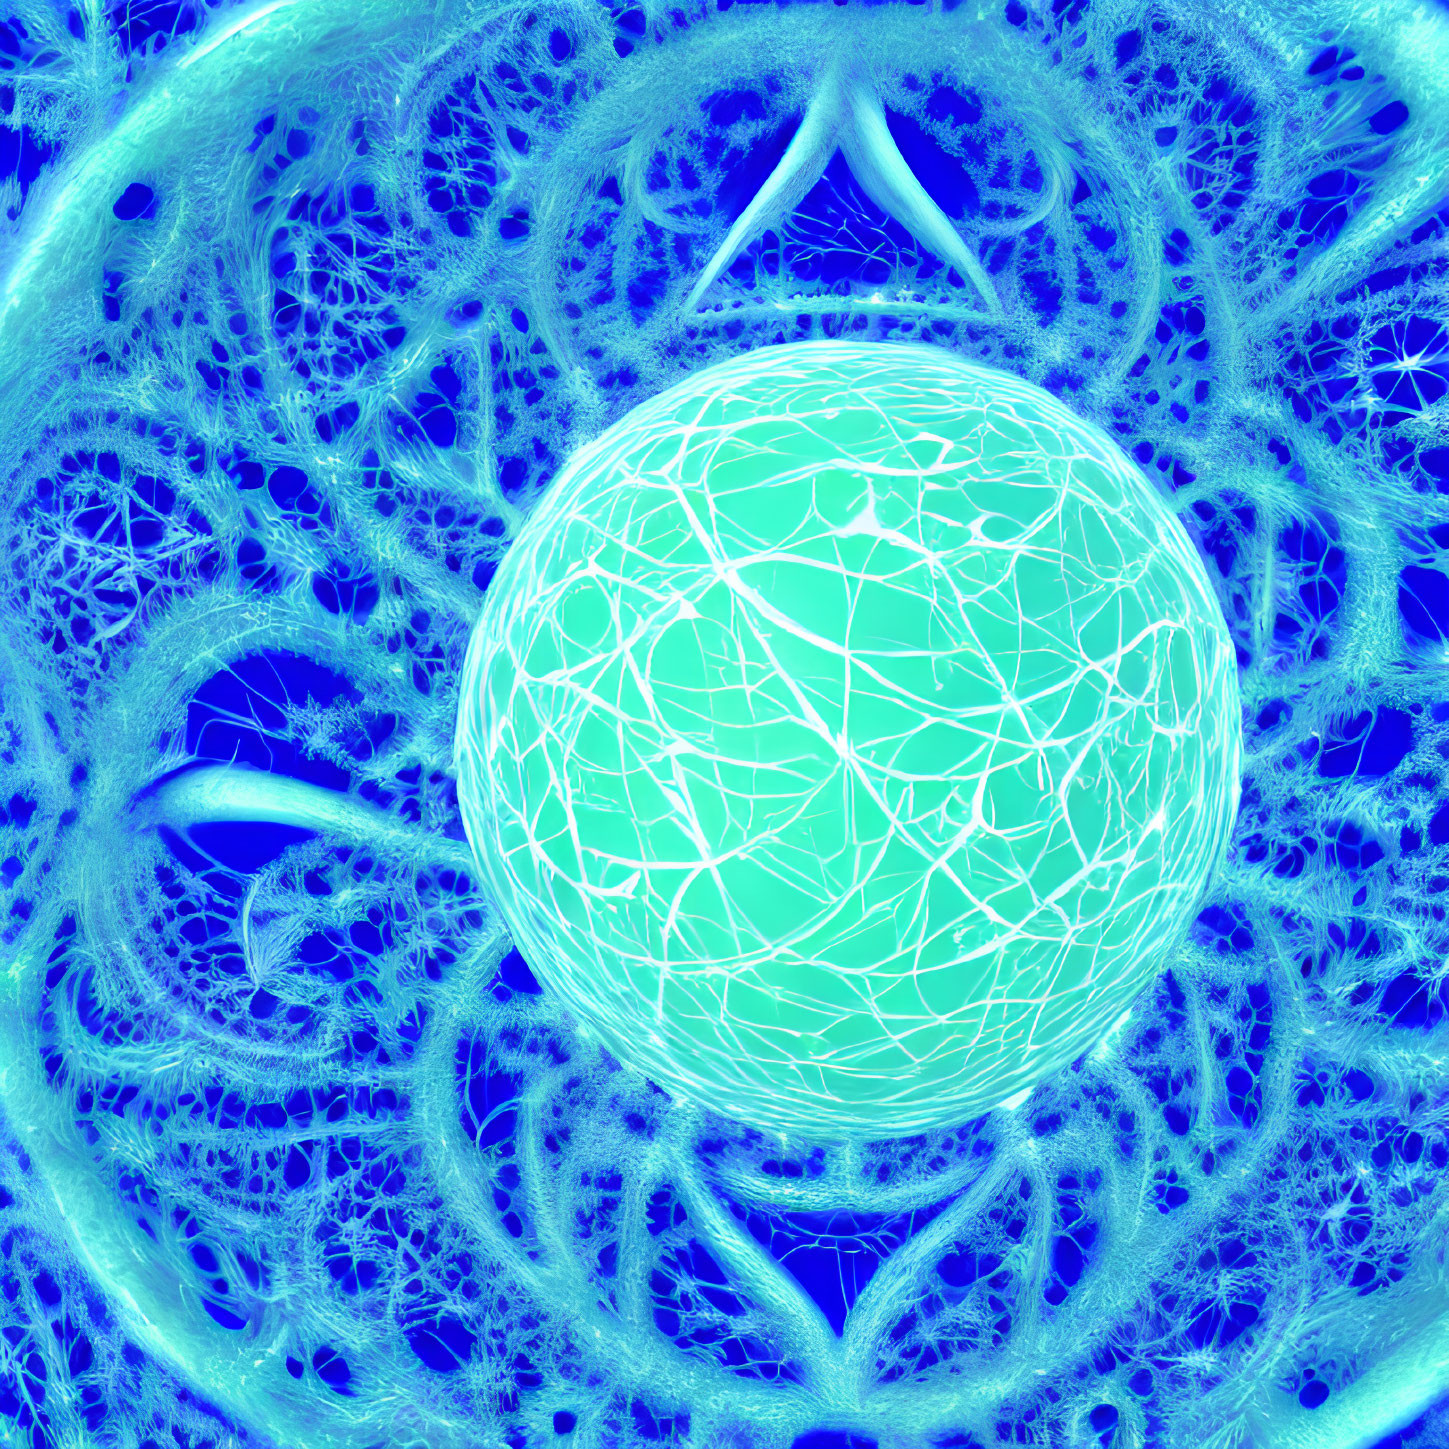 Intricate Blue Fractal Design with Central Sphere and Lace-like Patterns